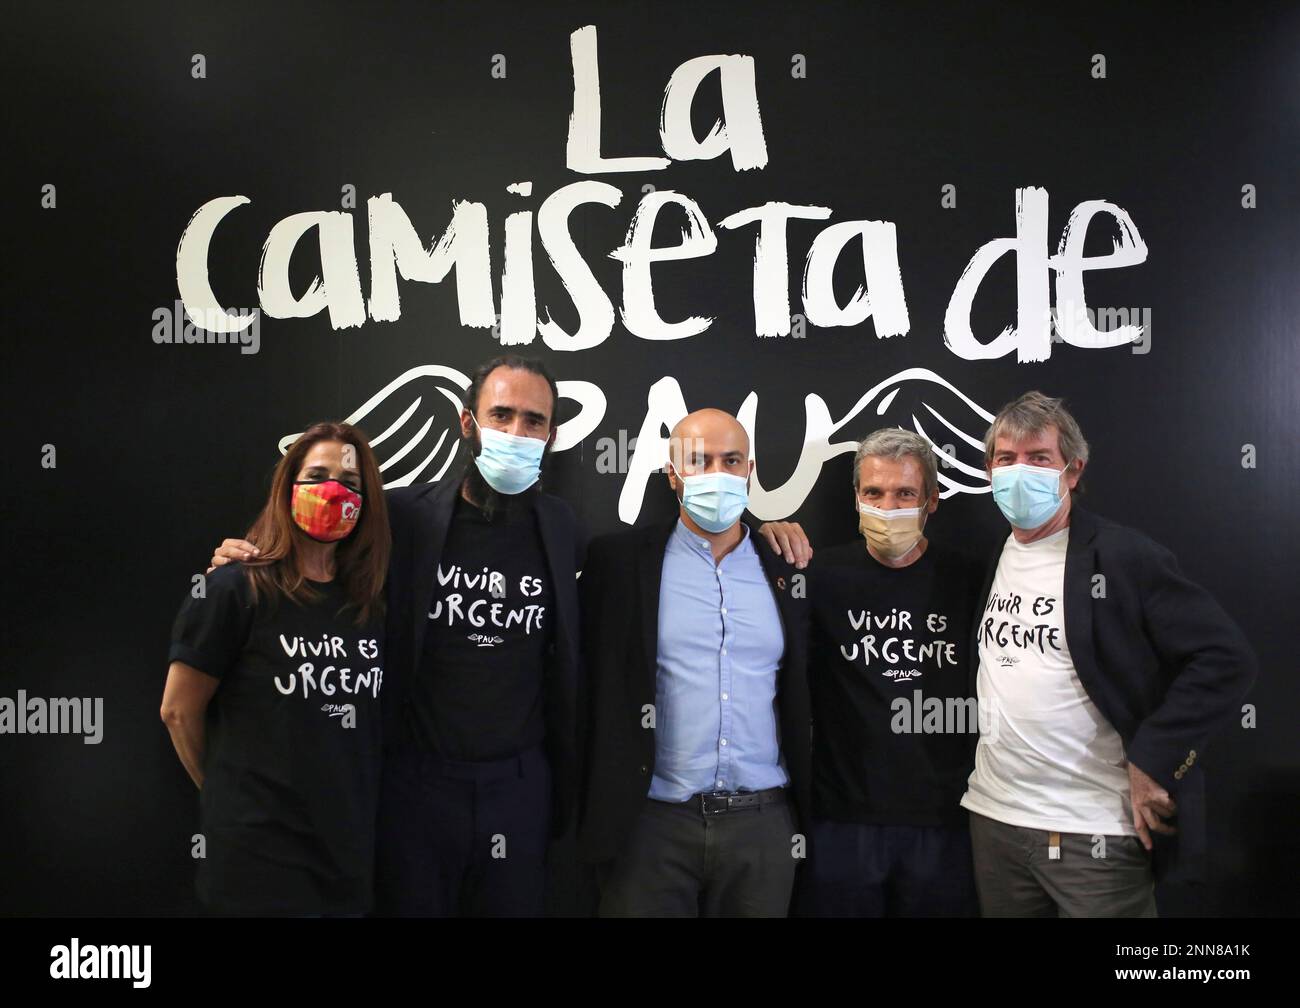 Jorge Martínez, graphic designer of Help! during the presentation of the  initiative against cancer 'Pau's T-shirt', on June 8, 2021, in Madrid (Spain).  With the slogan "Living is urgent" printed on the